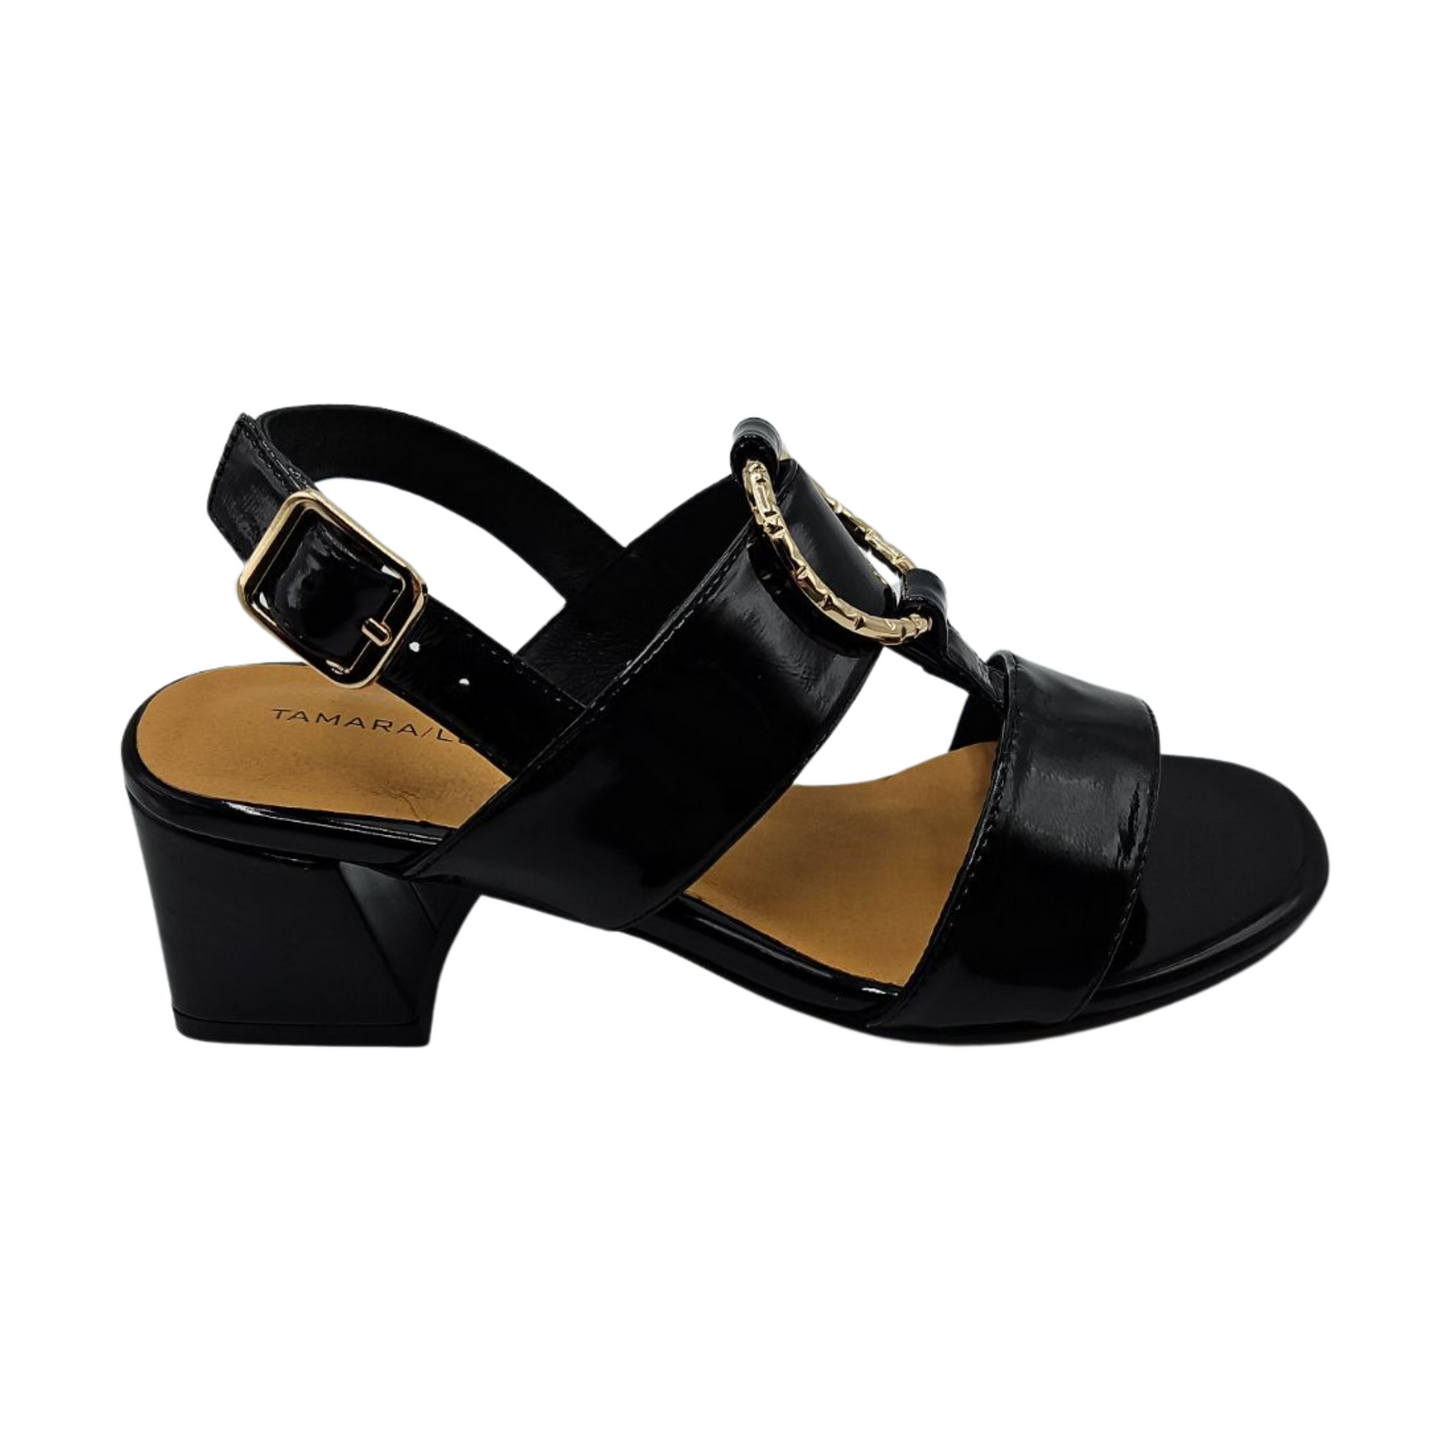 Right facing view of black patent leather sandal with wrapped block heel, adjustable sling back strap and gold details,